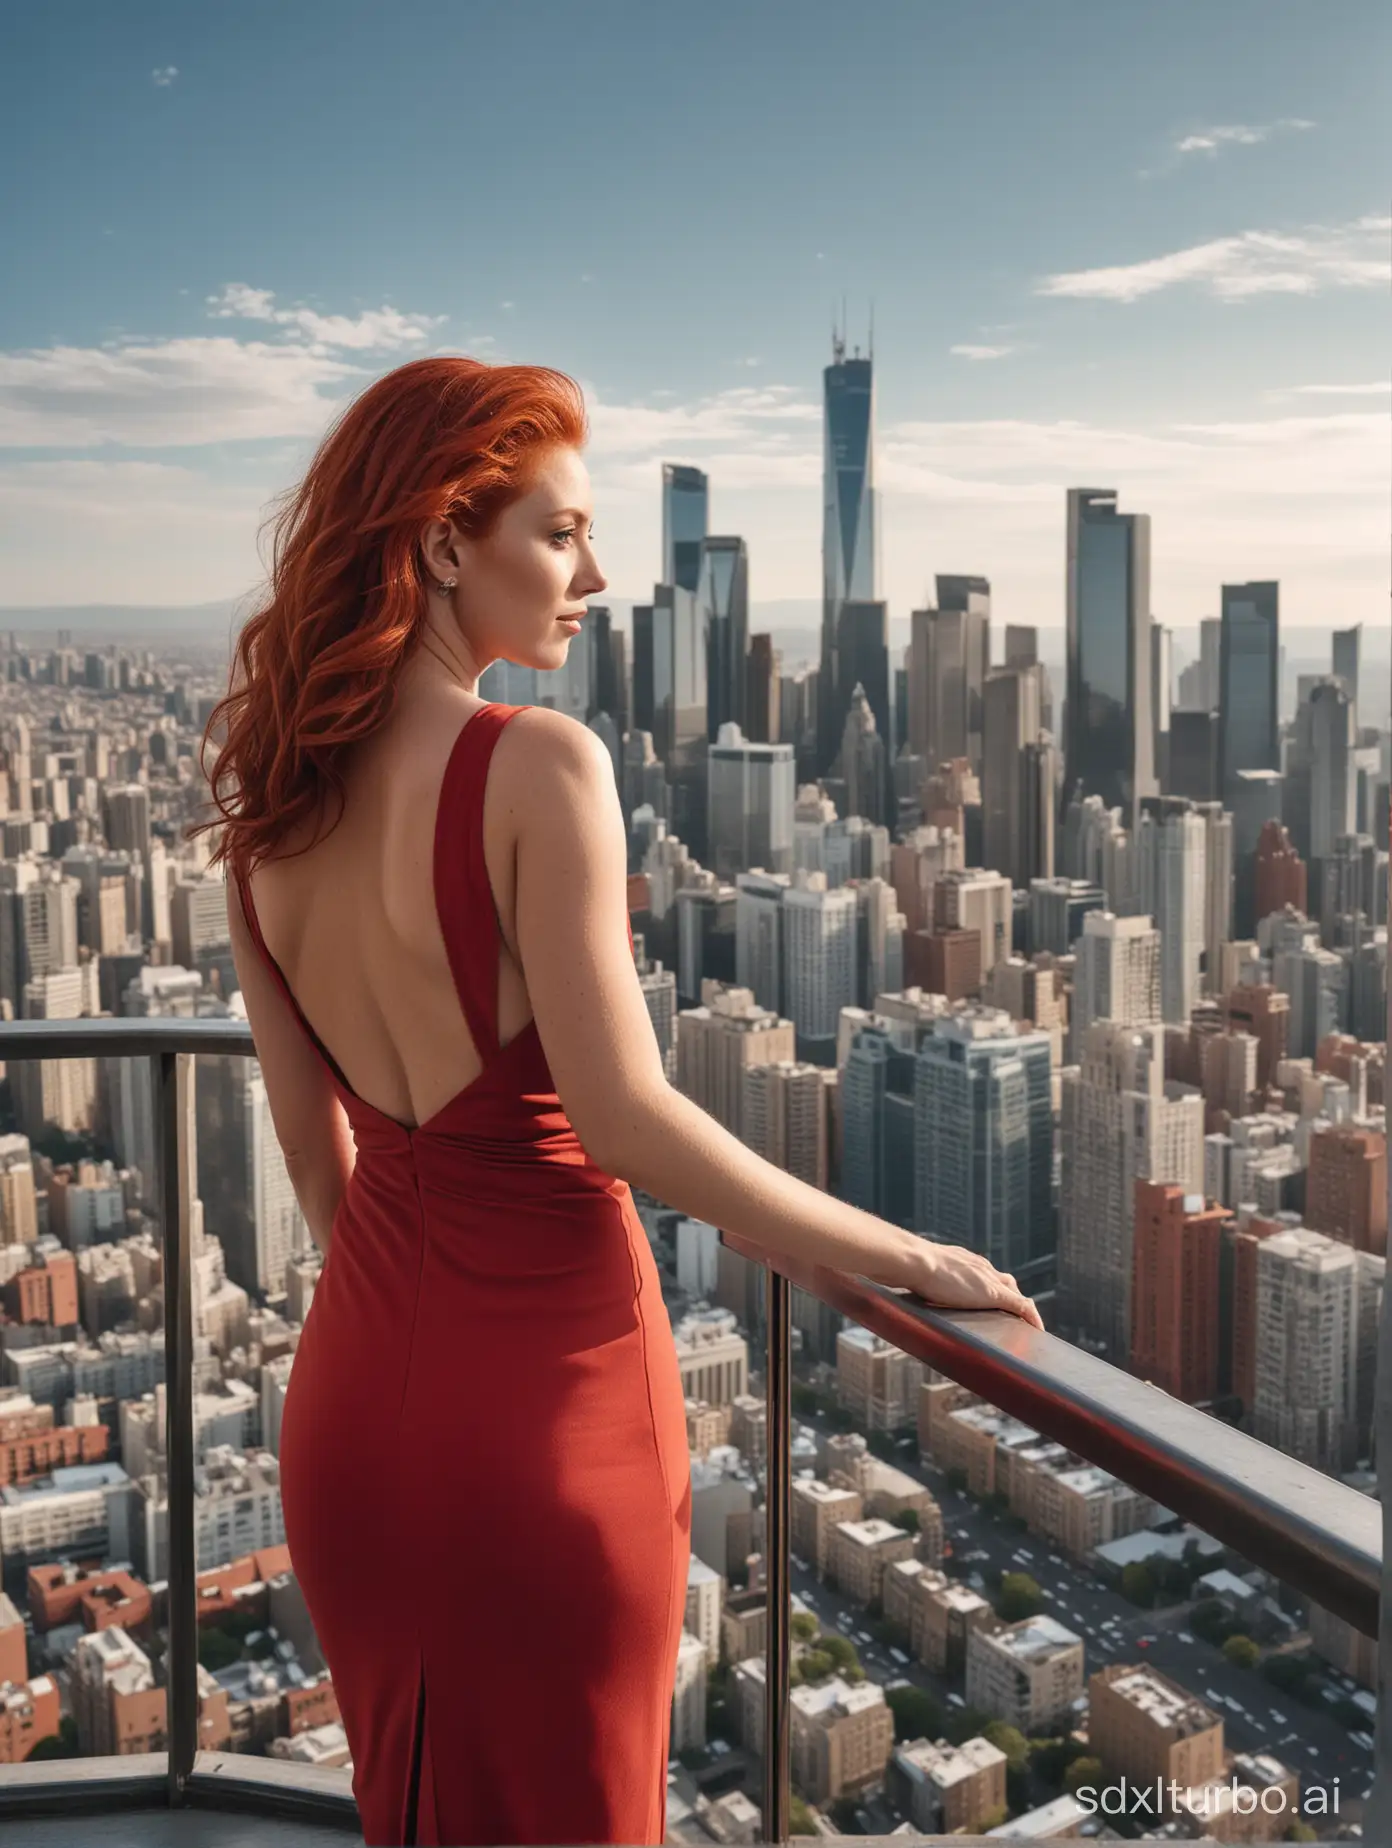 In the image, a woman with vibrant red hair is the central figure, standing on a balcony overlooking a cityscape. She is elegantly dressed in a red dress that contrasts with the city's skyline. The woman is positioned on the right side of the image, her back facing the camera, giving a clear view of her back and shoulders. The cityscape behind her is a mix of tall buildings, including a prominent skyscraper, with a clear blue sky and a few clouds in the distance.